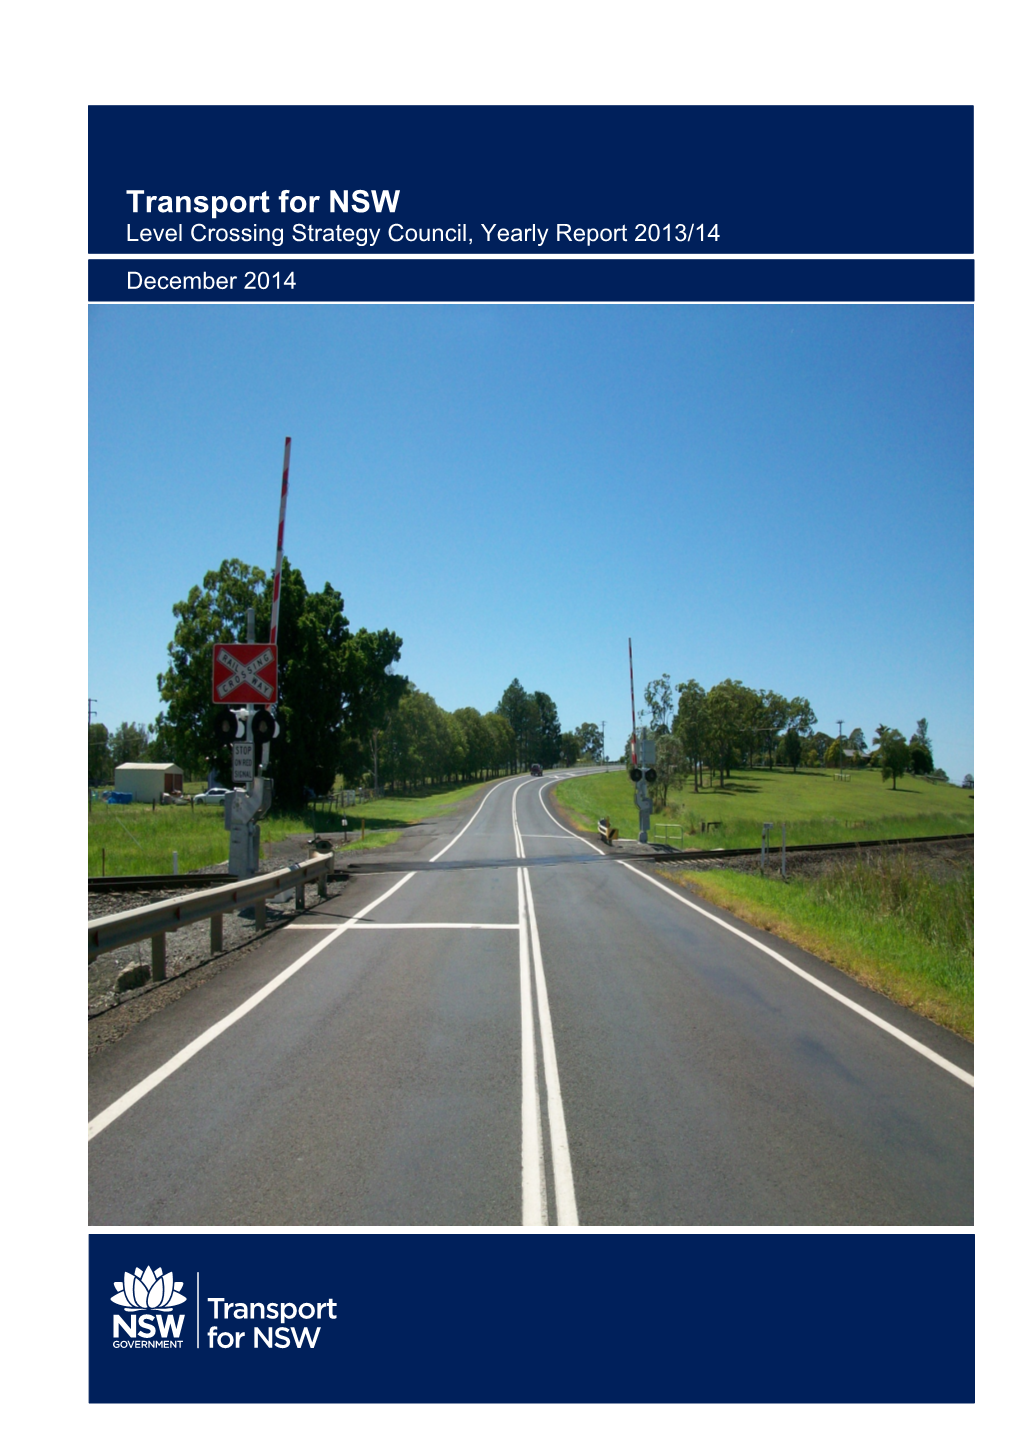 2013/14 Level Crossing Strategy Council (LCSC) Yearly Report